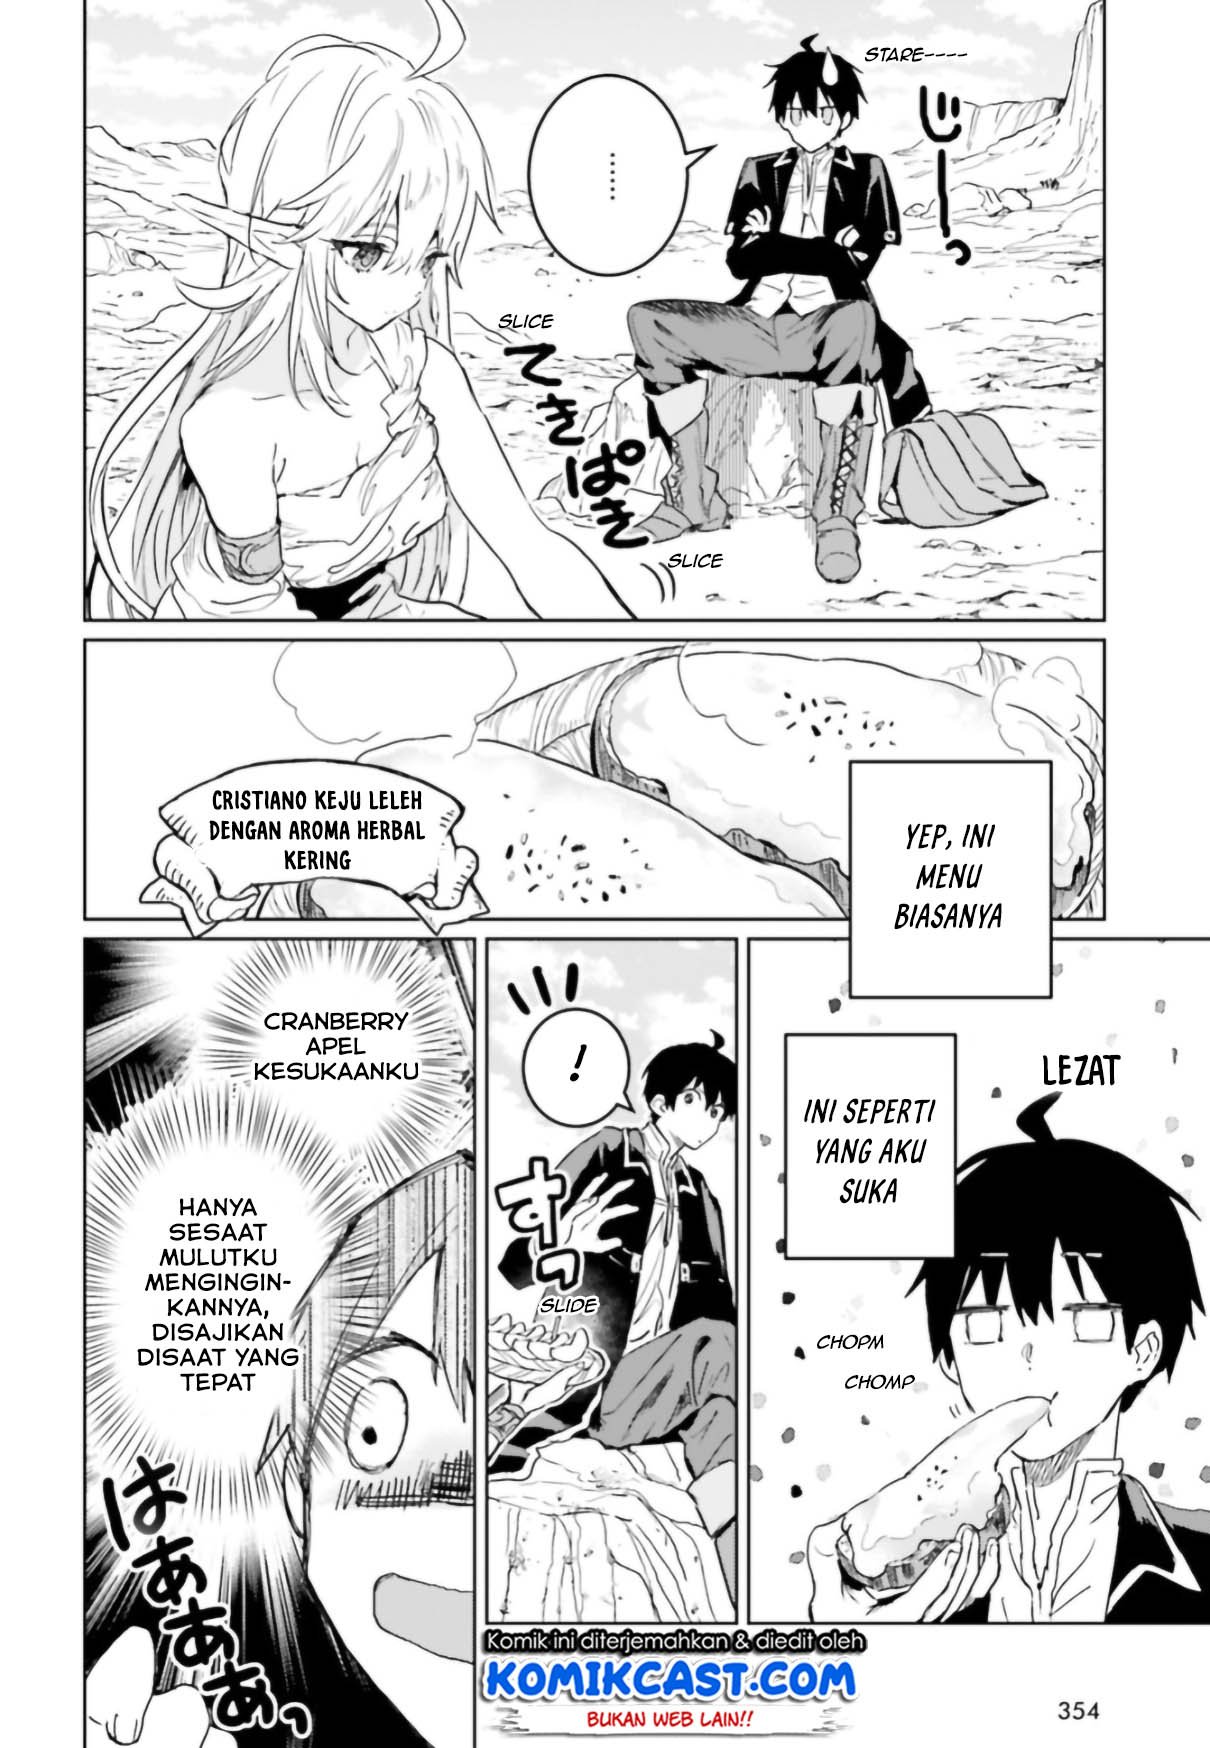 The Sorcerer King of Destruction and the Golem of the Barbarian Queen Chapter 07